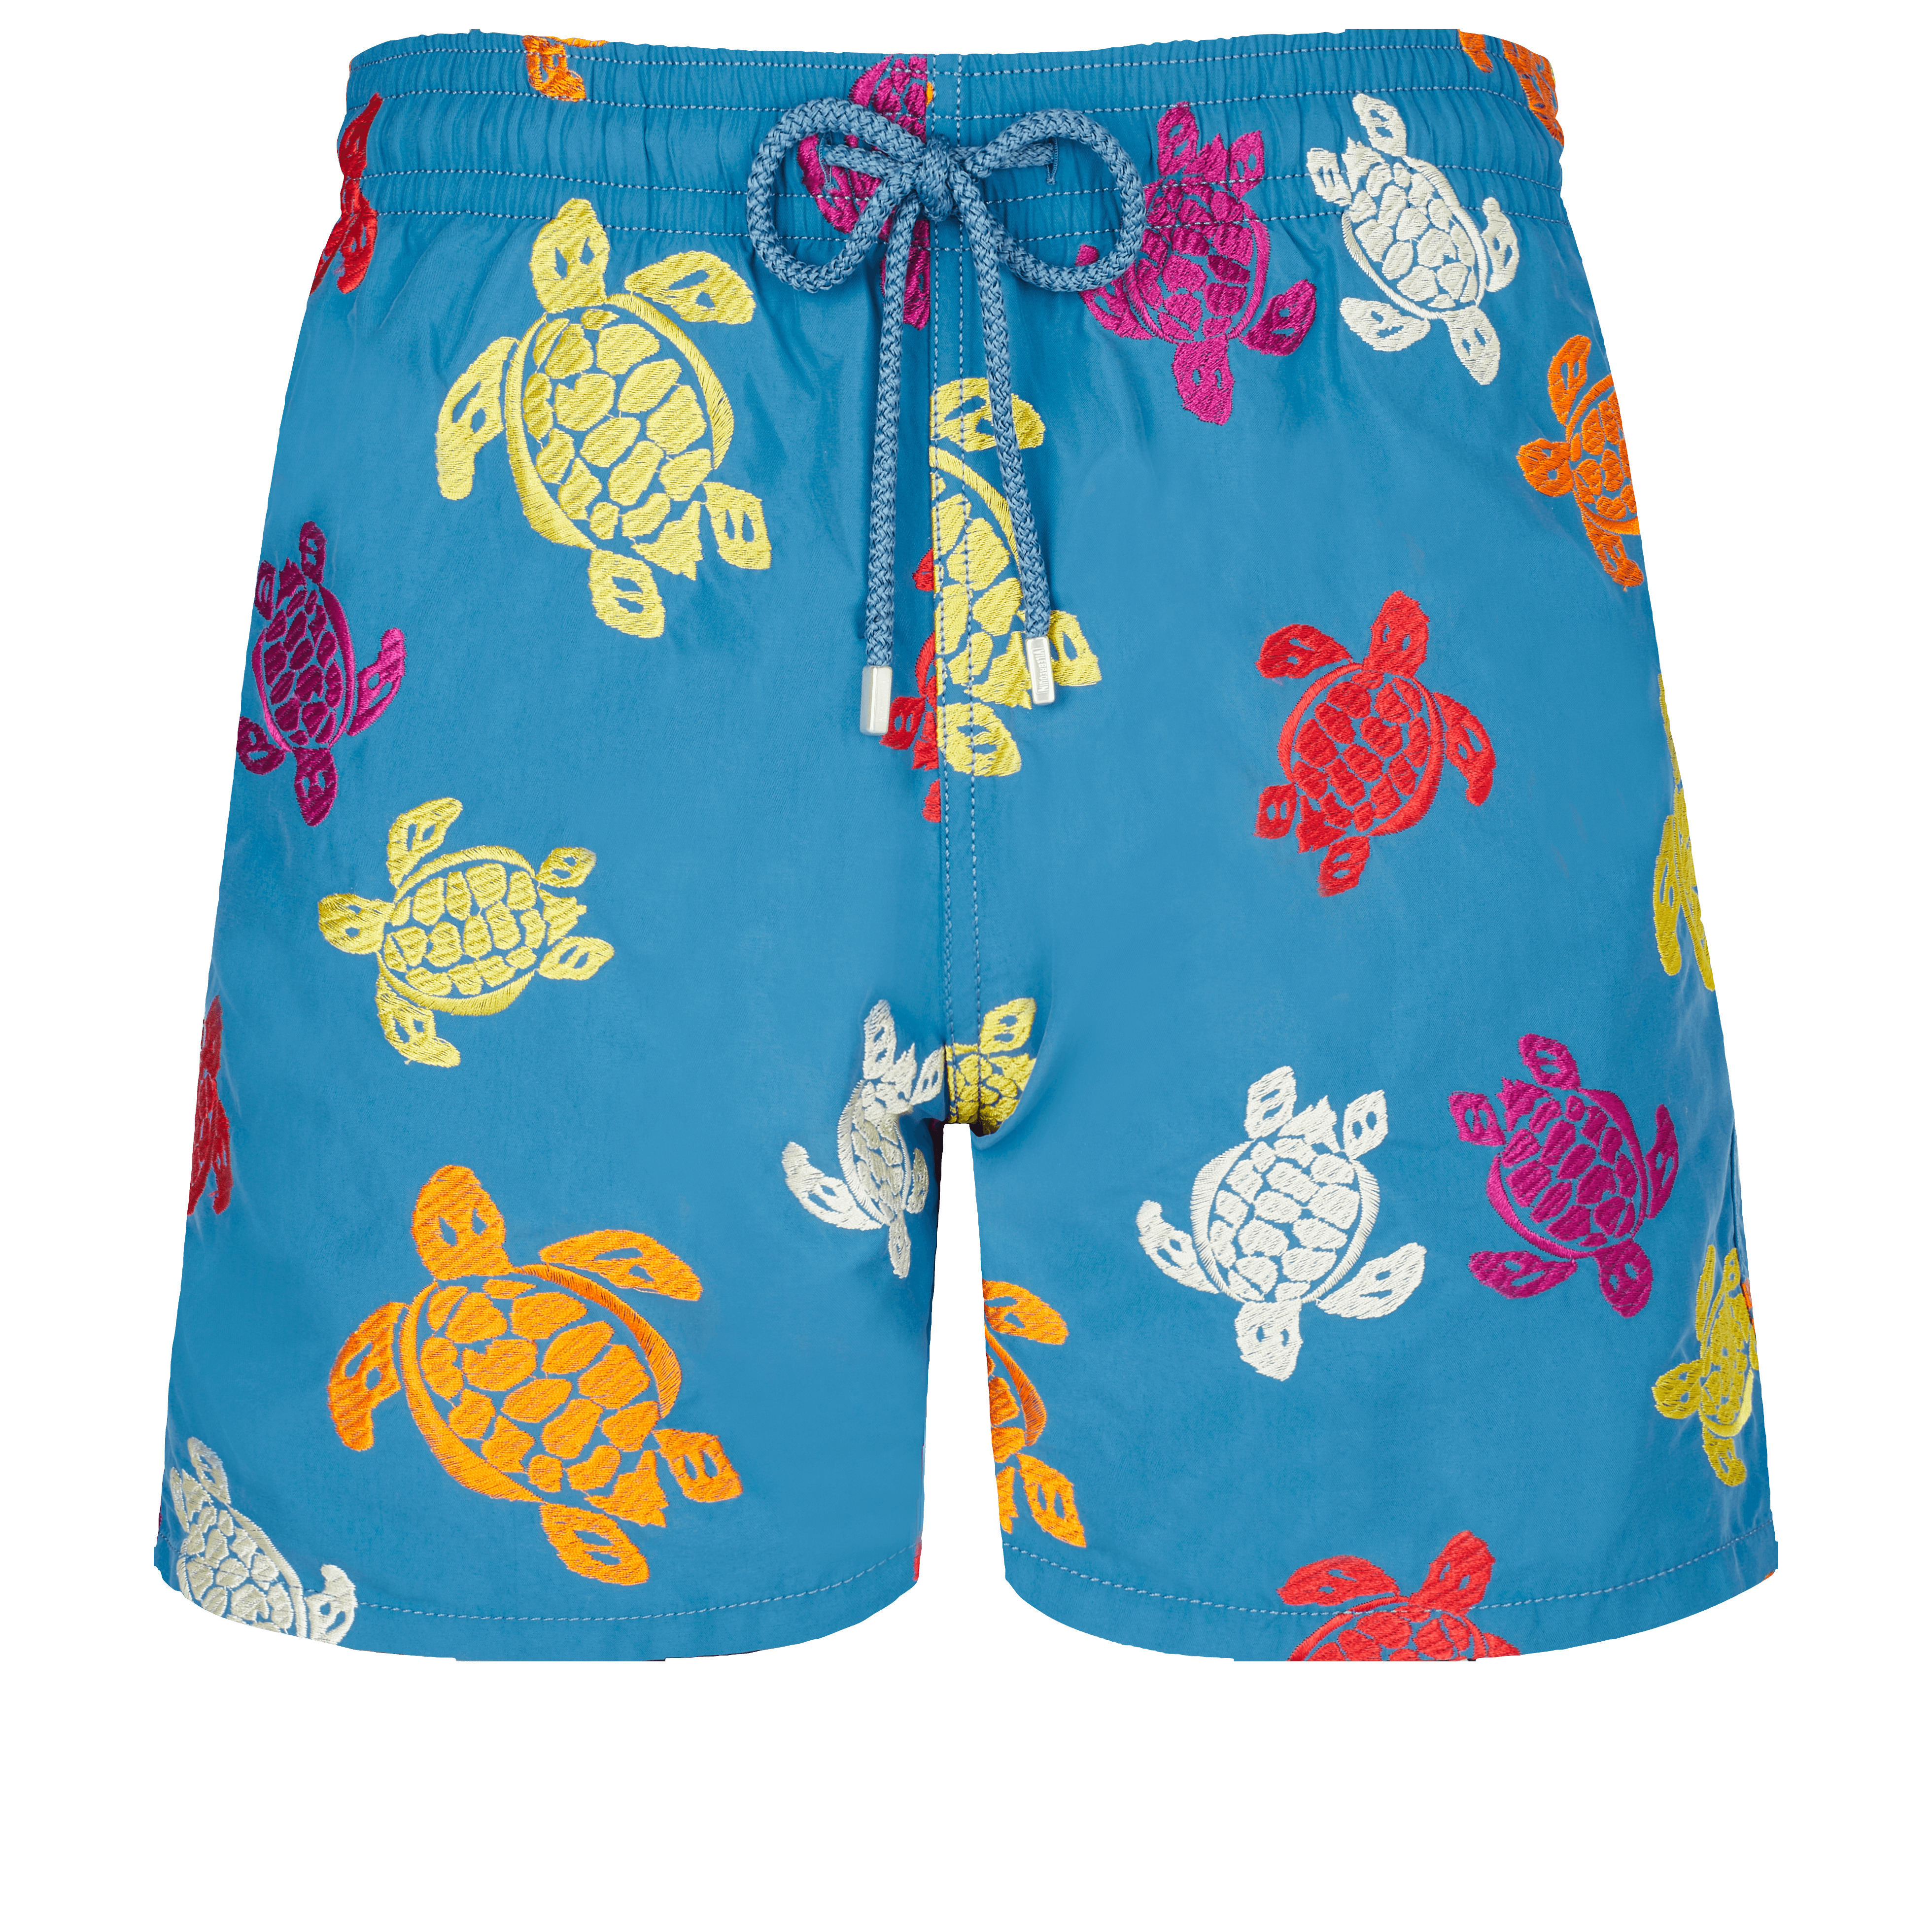 Men Swim Trunks Embroidered Ronde Tortues Multicolores - Limited Edition - 1